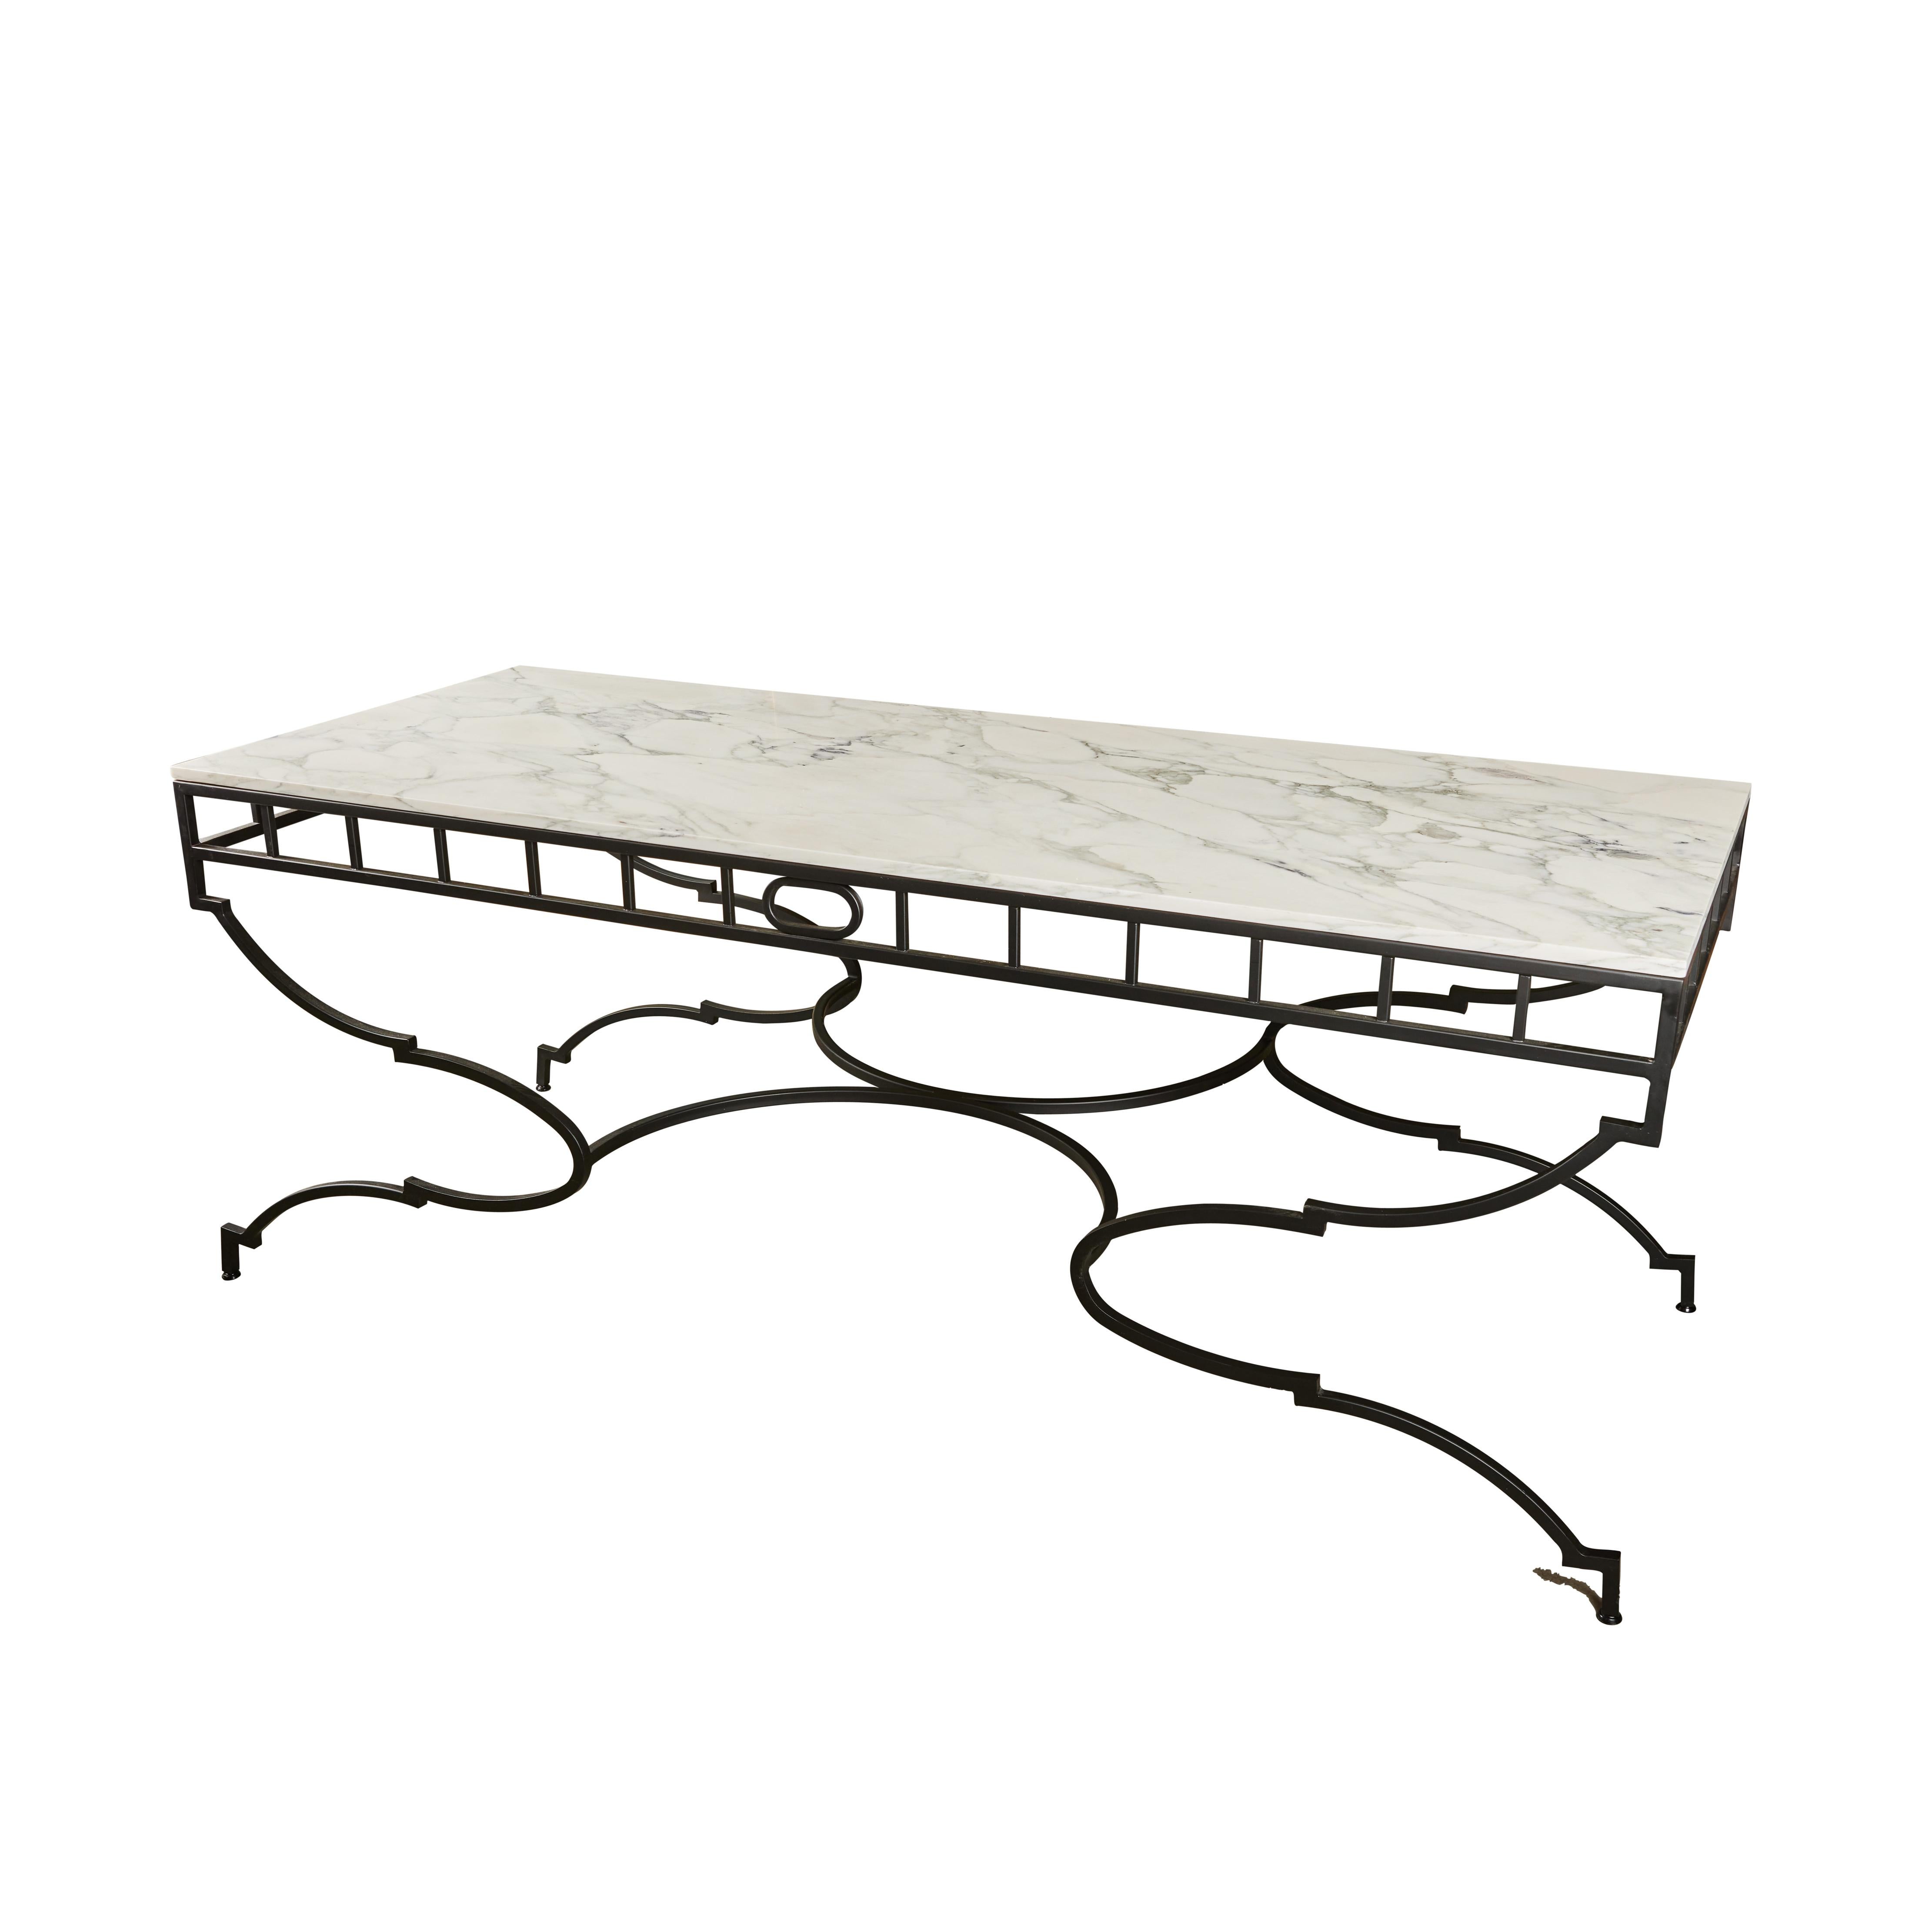 This outstanding custom designed rectangular iron console table is topped with a slab of newly honed Italian Calacatta Verde marble. The table frame has a rich black powder coated finish and paired with the marble creates a striking presentation. It